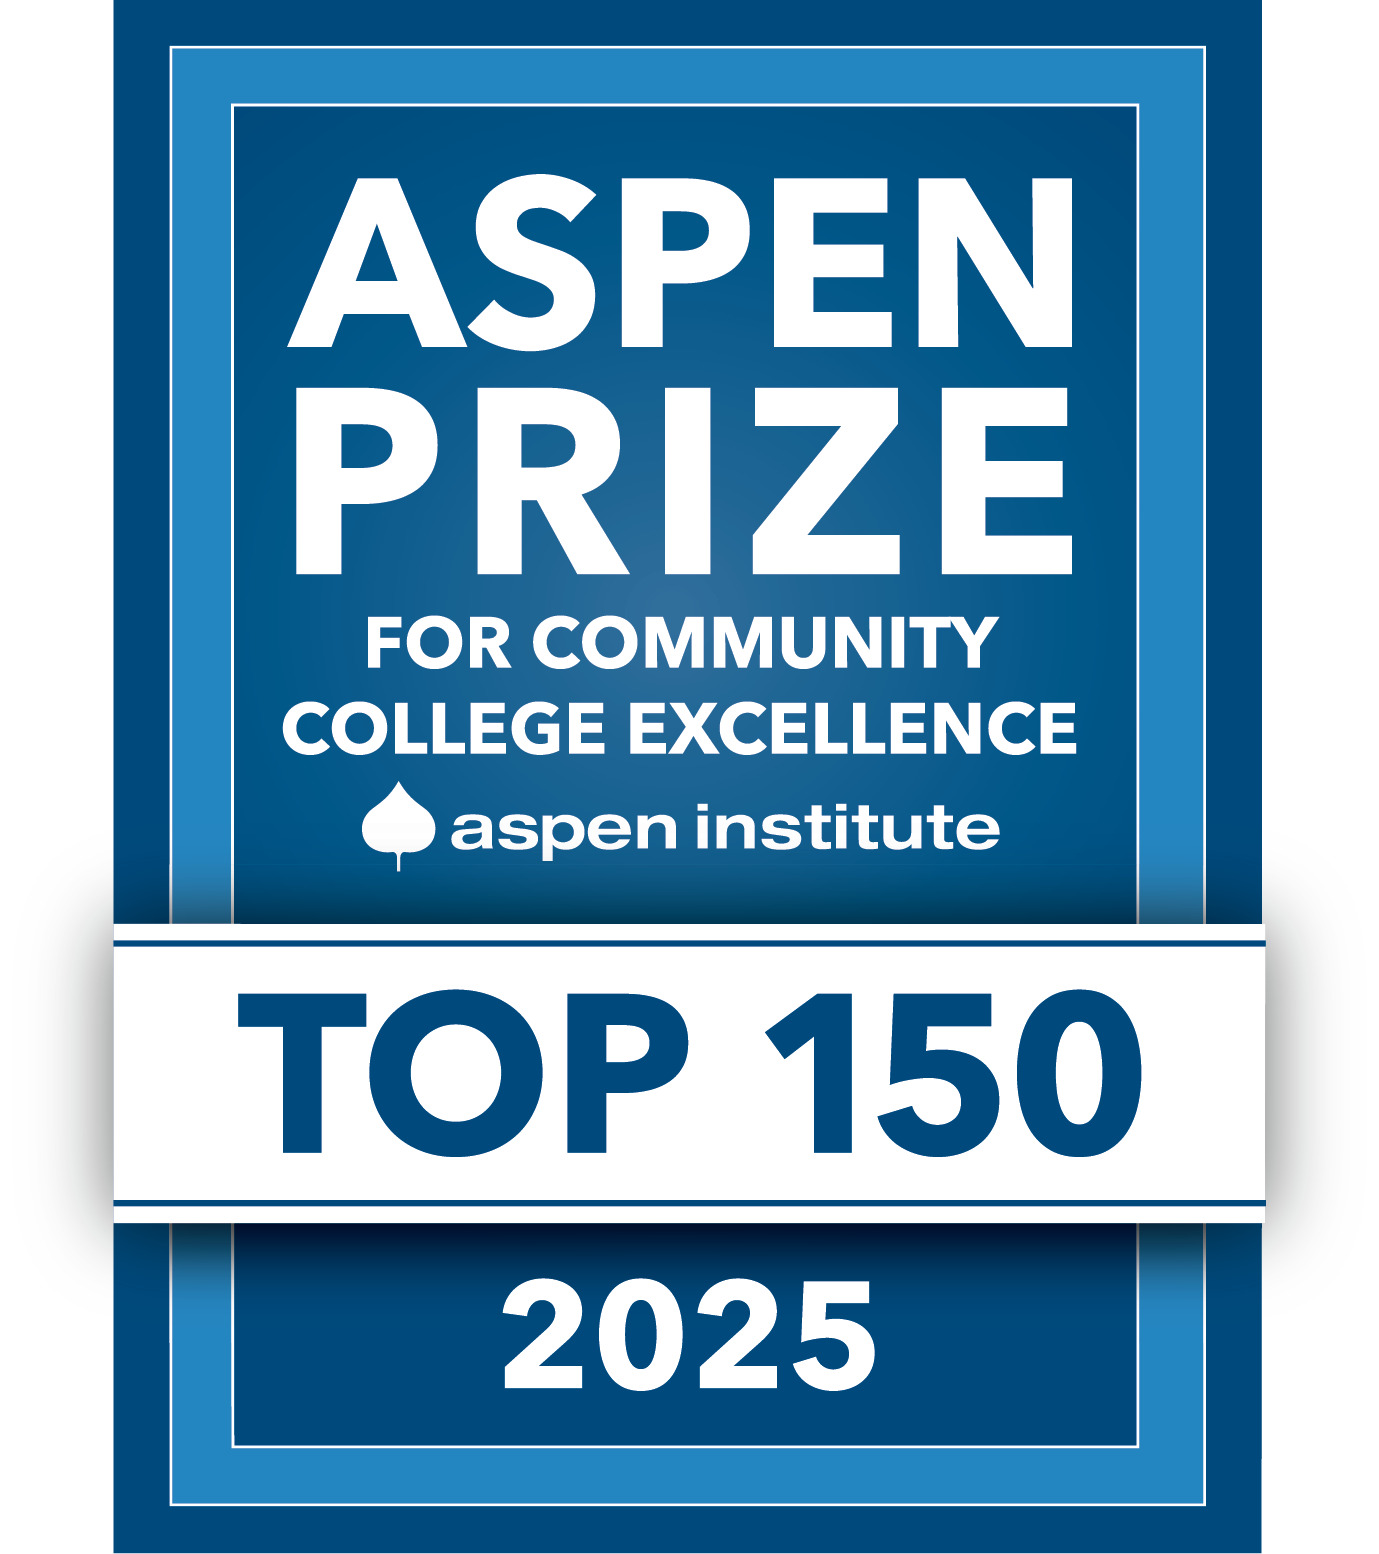 Aspen Prize for Community College Excellence from the Aspen Institute, Top 150 in 2025